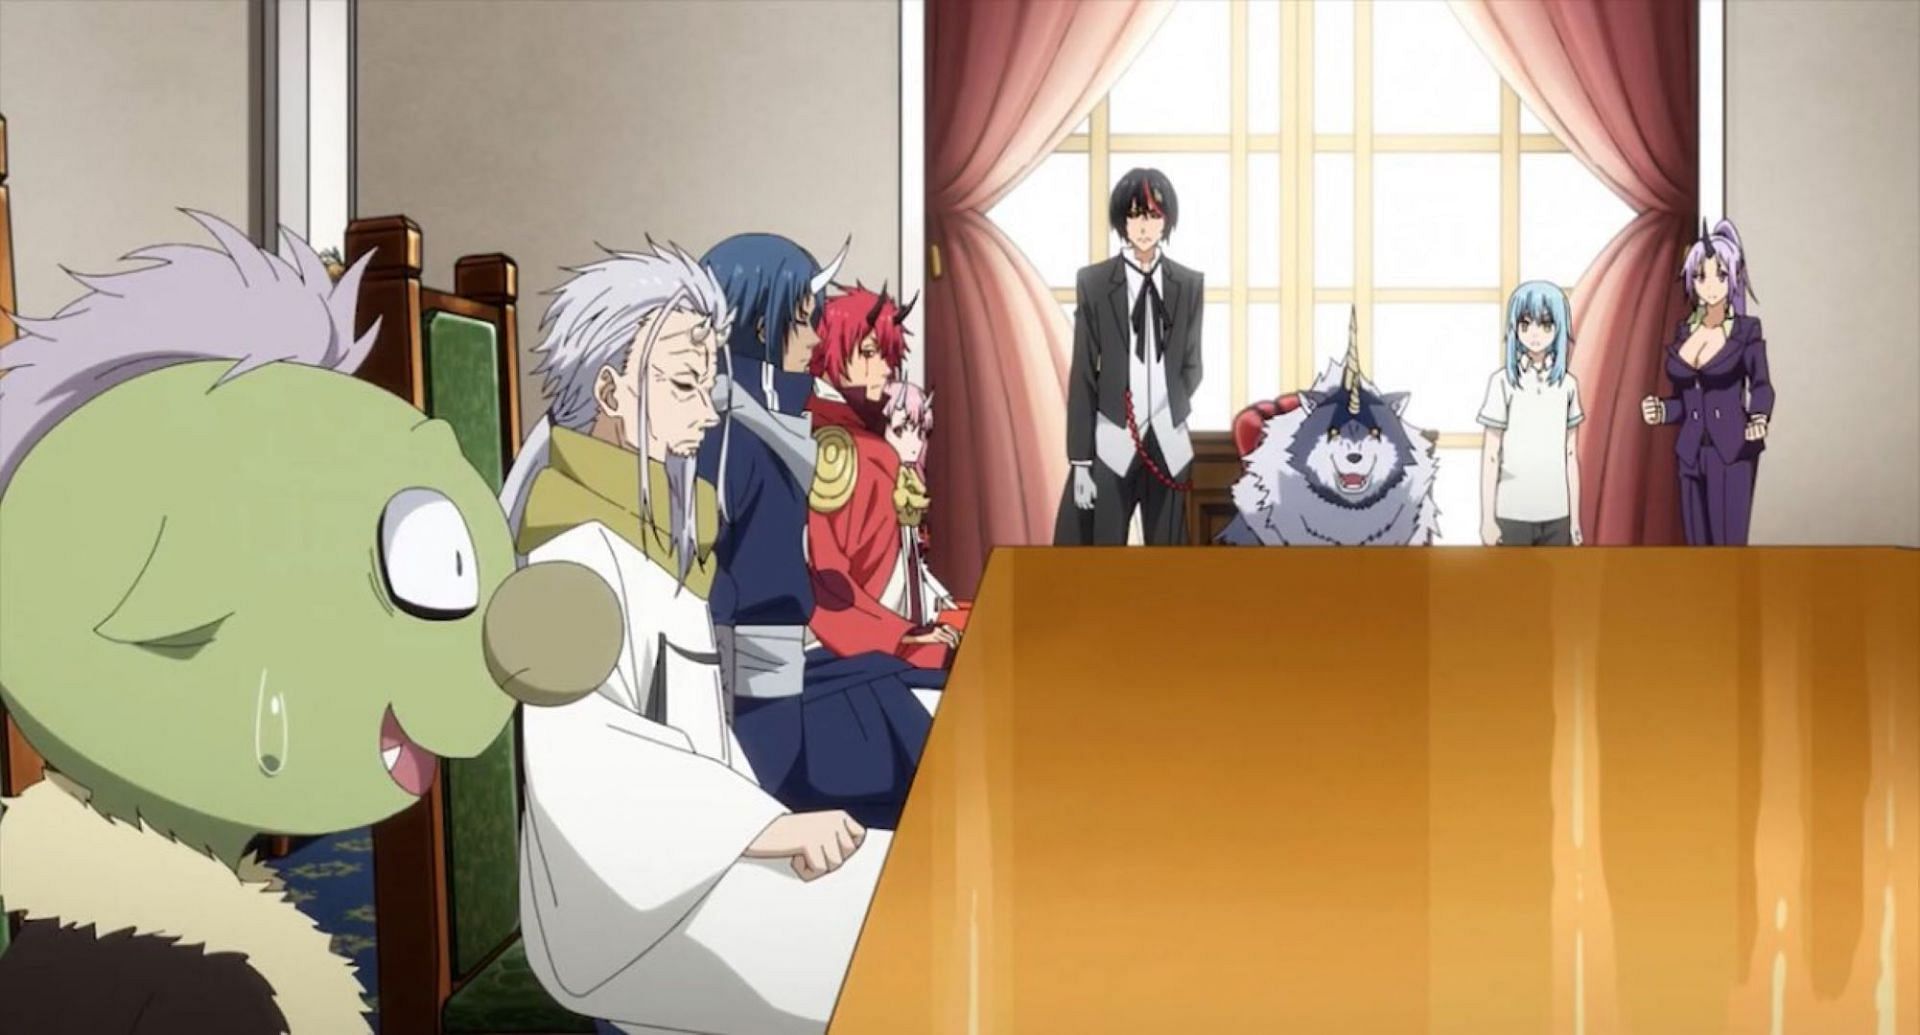 Rimuru holding a meeting, as seen in the episode (Image via 8Bit)